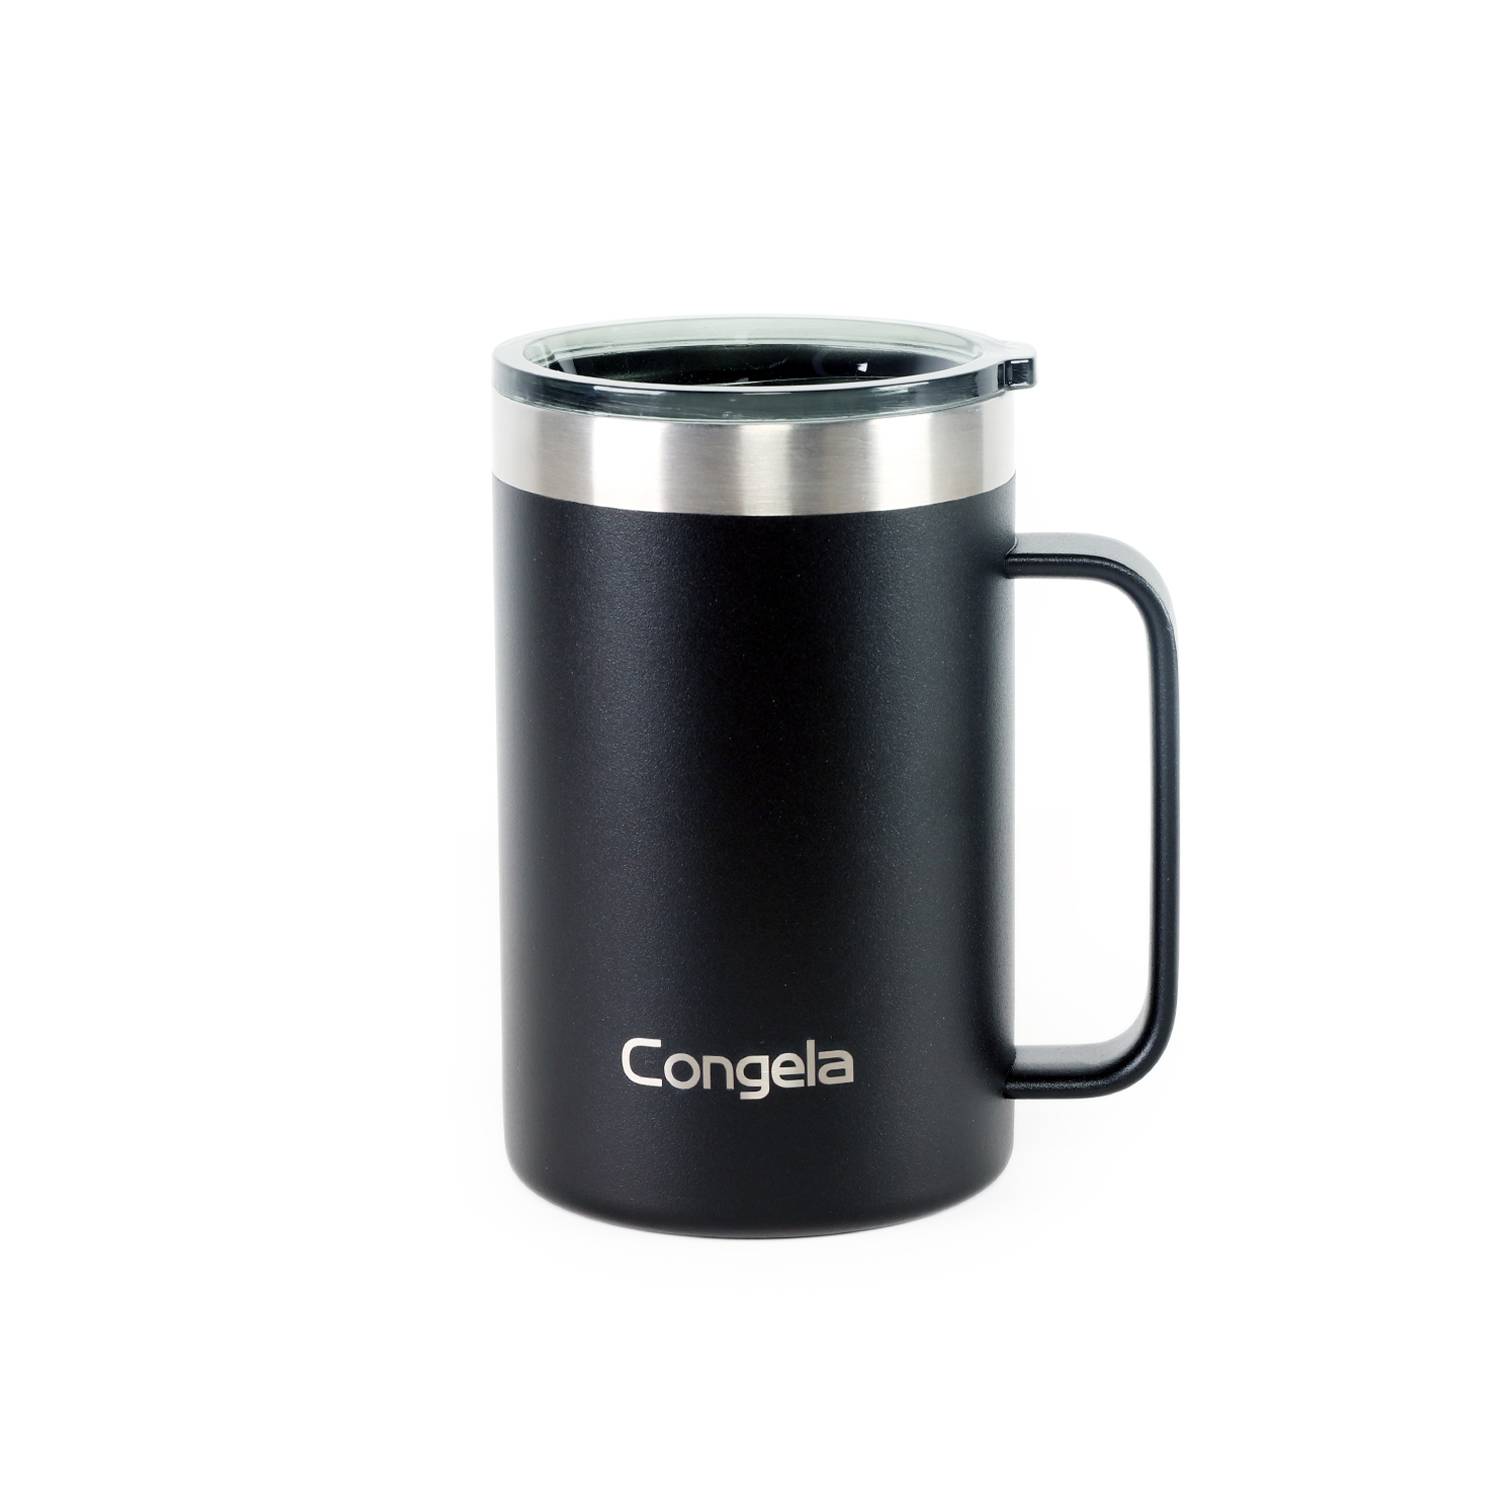 High Performance Stainless Steel Sublimation Travel Mug -
 Congela 22oz Stainless Steel Insulated Coffee Mug with Handle – Yuehua